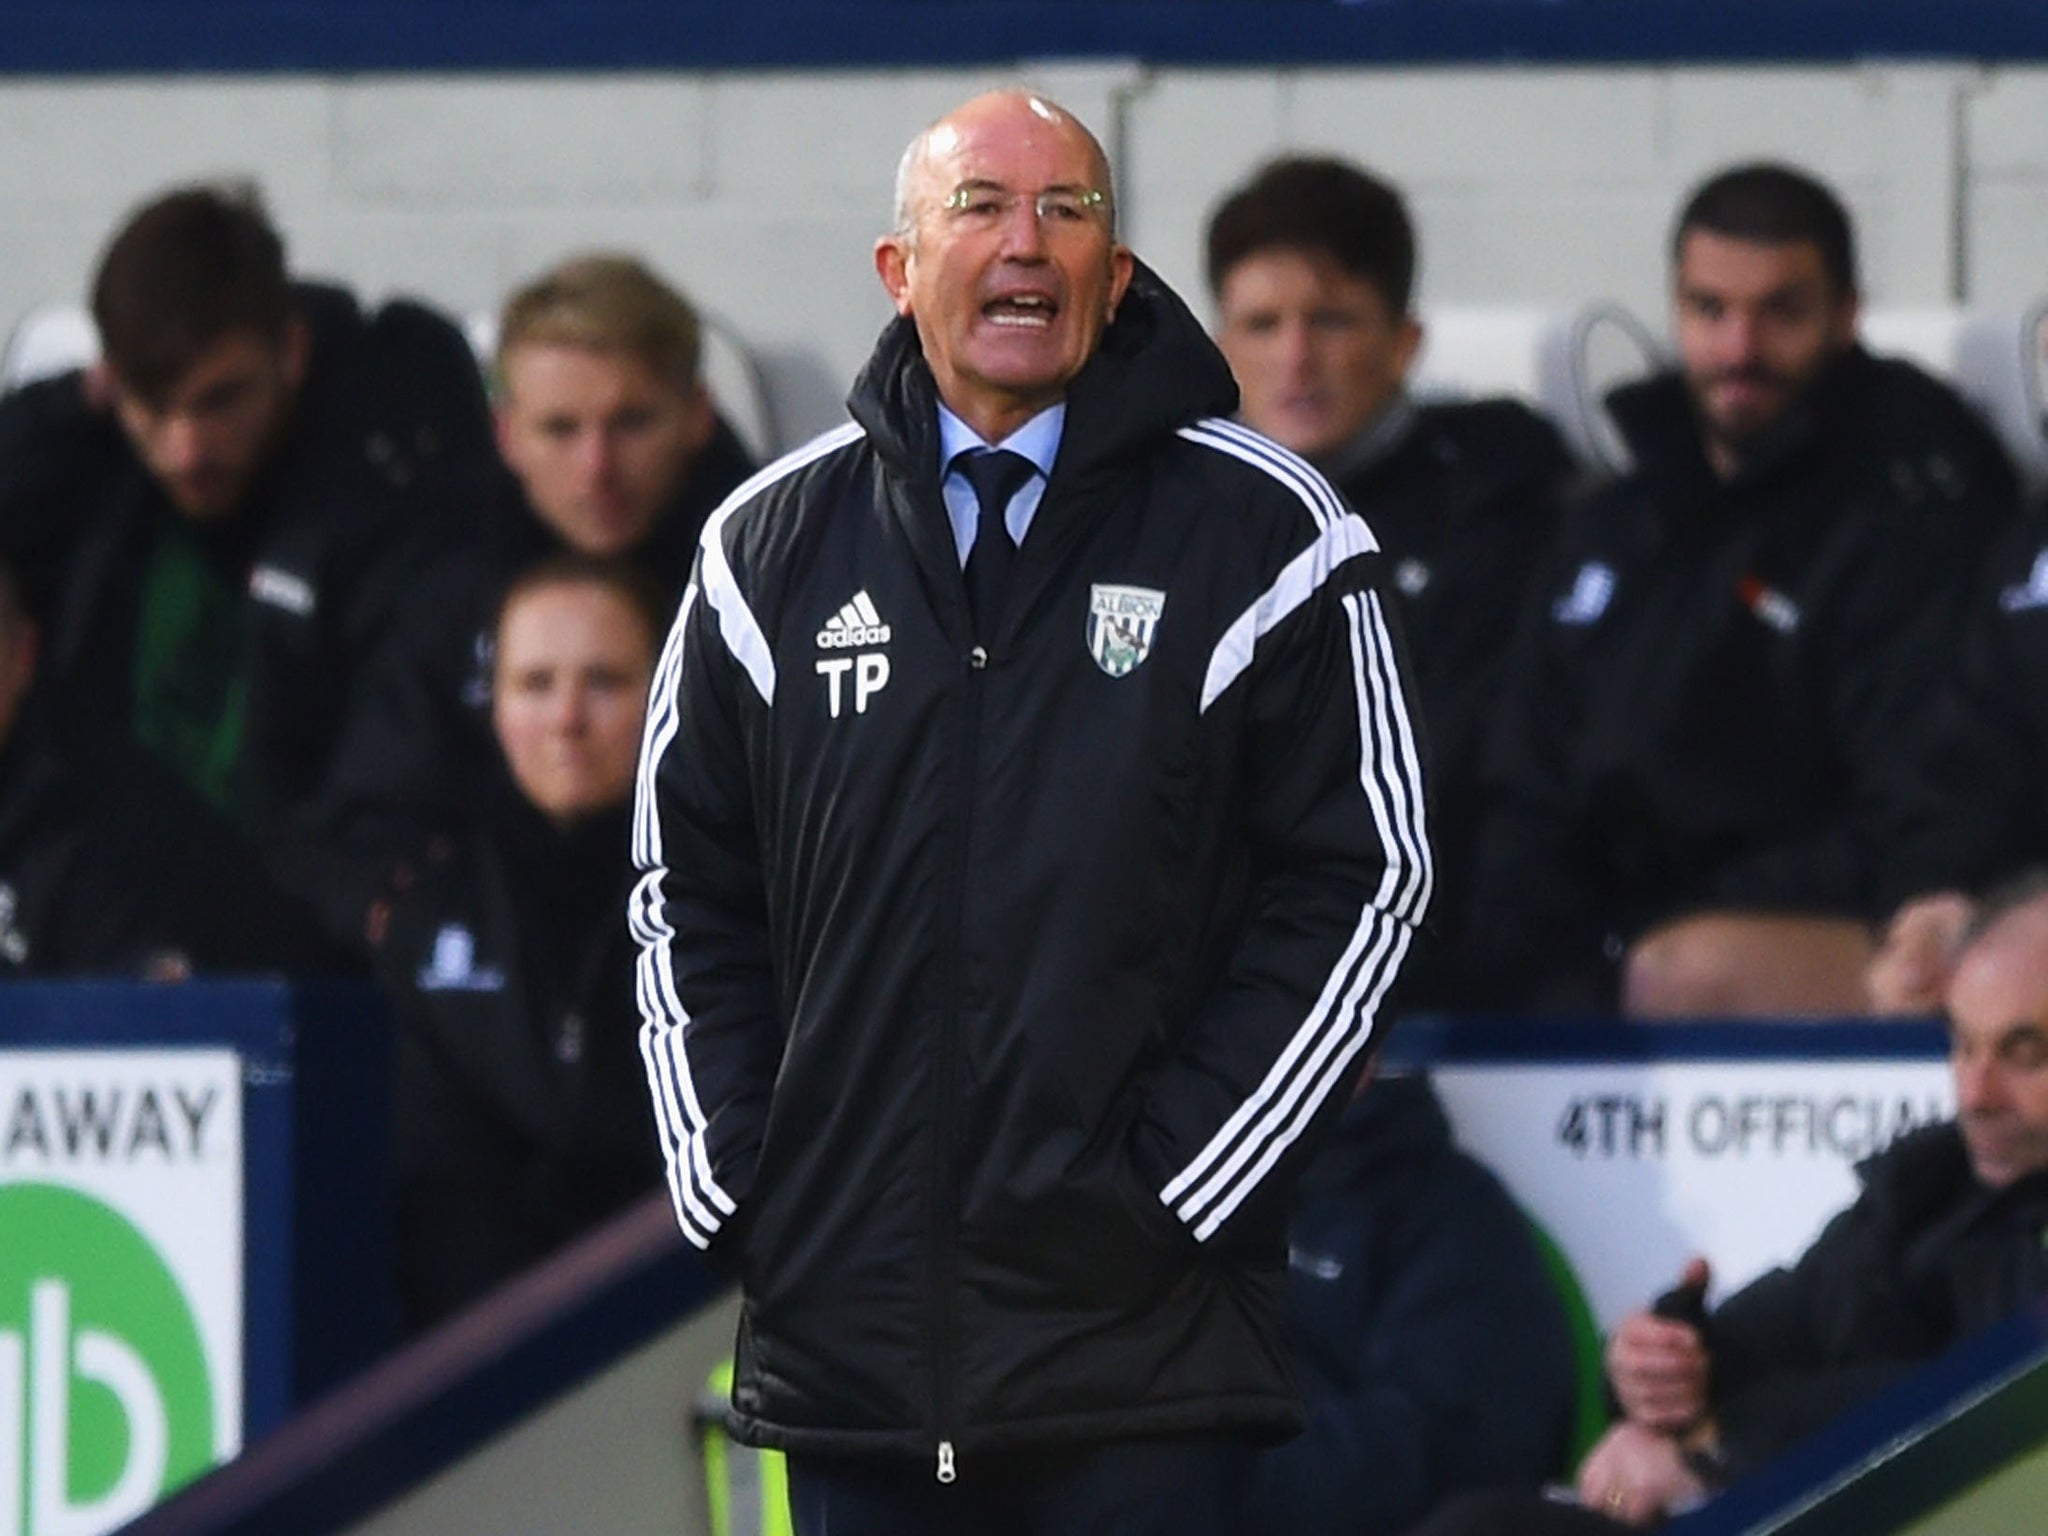 New West Brom manager Tony Pulis